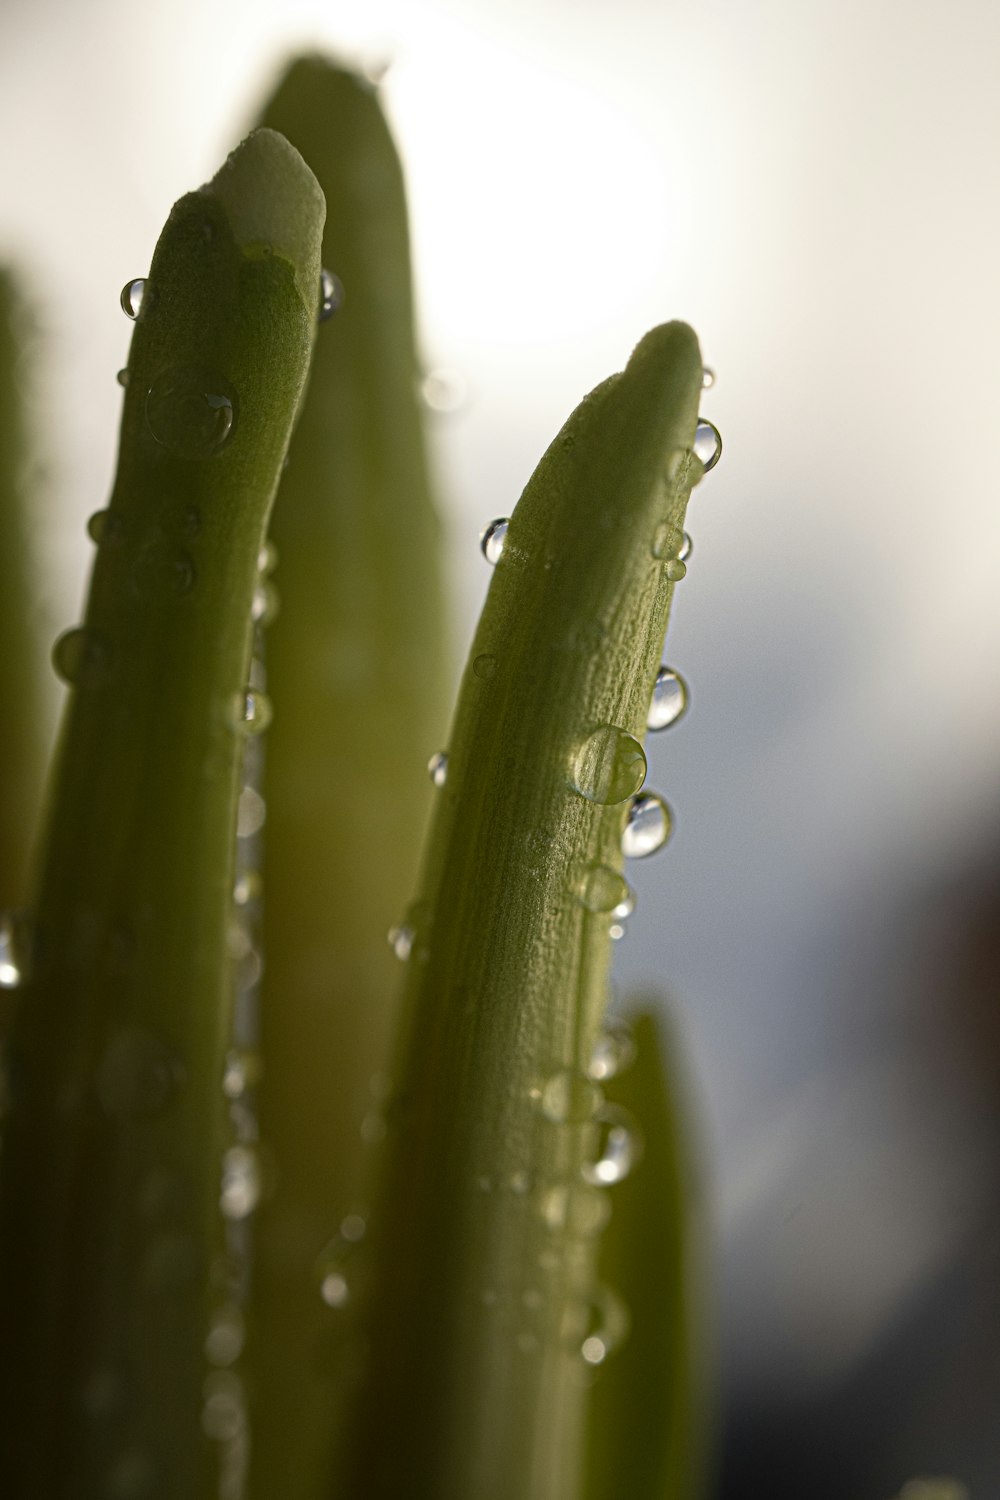 a close up of a plant with water droplets